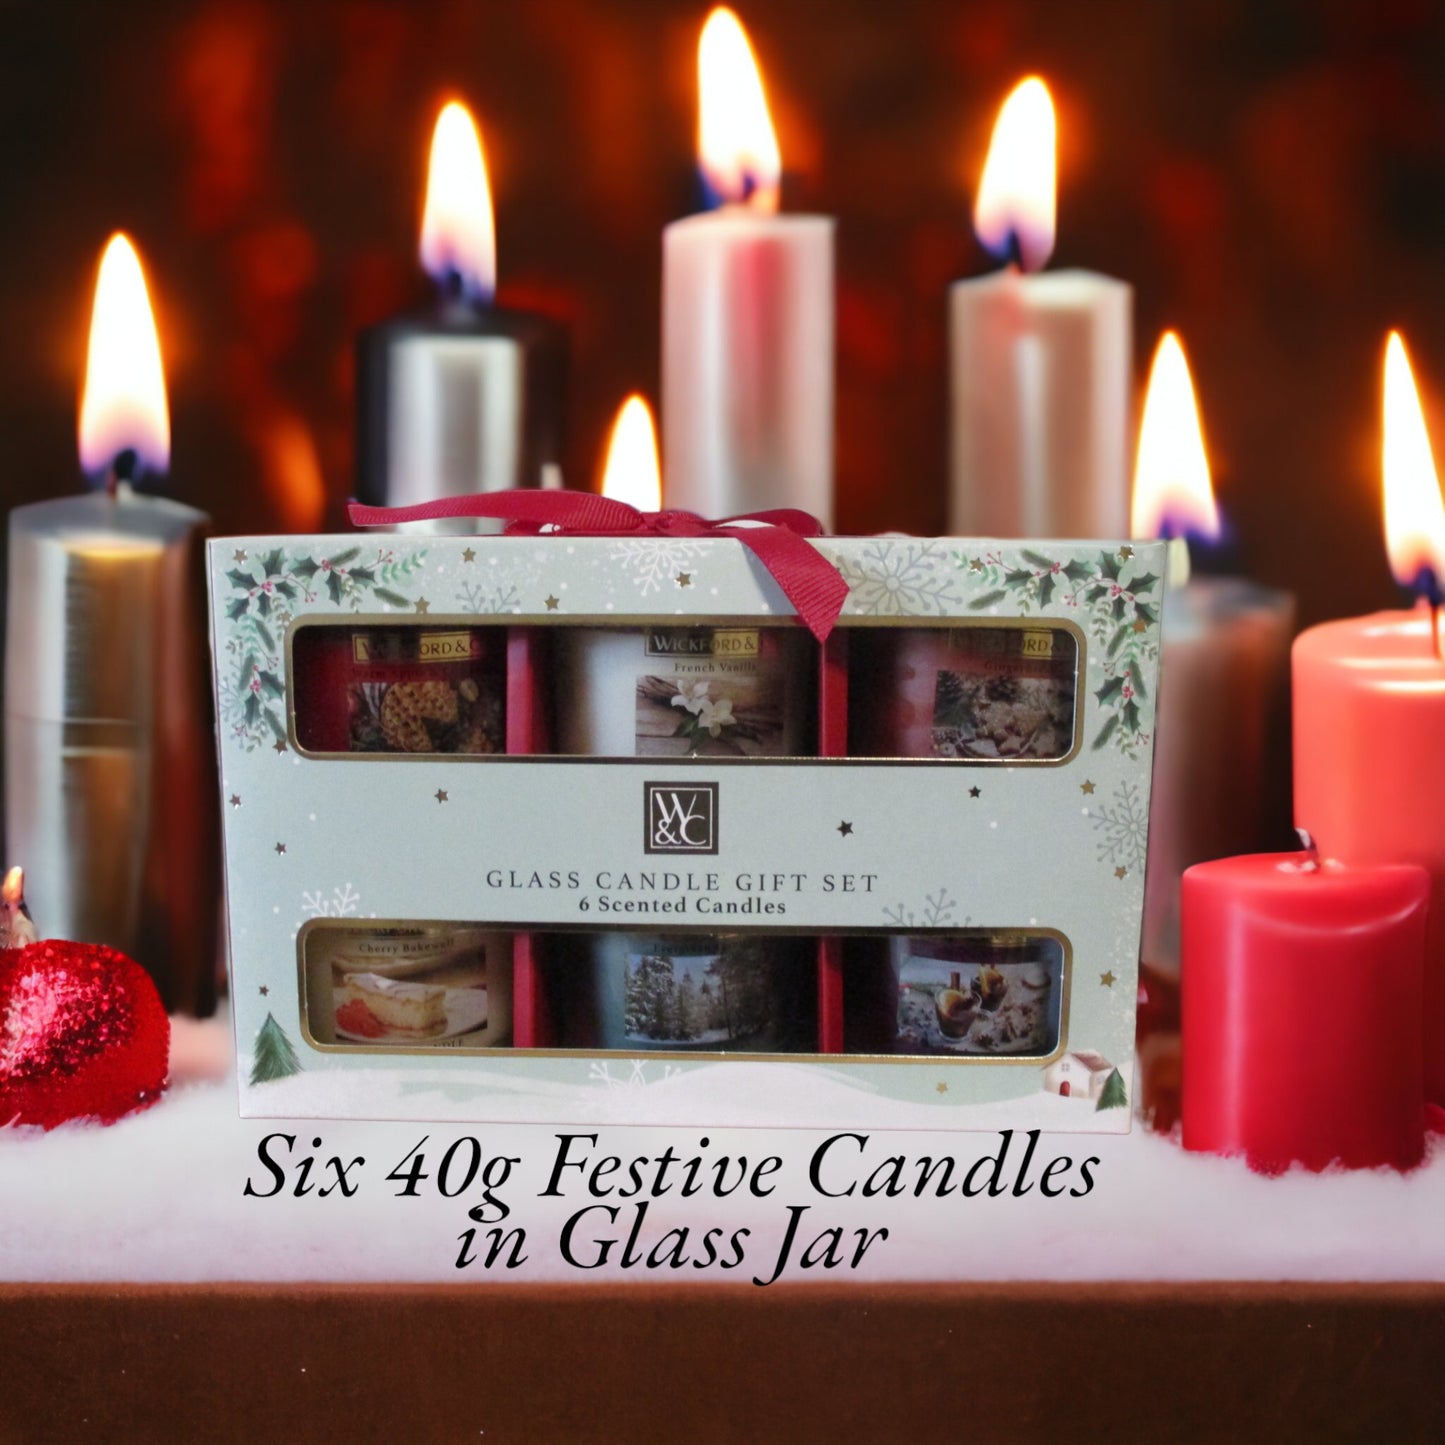 Wickford & Co - Candle Gift Sets - Christmas 3 x Options